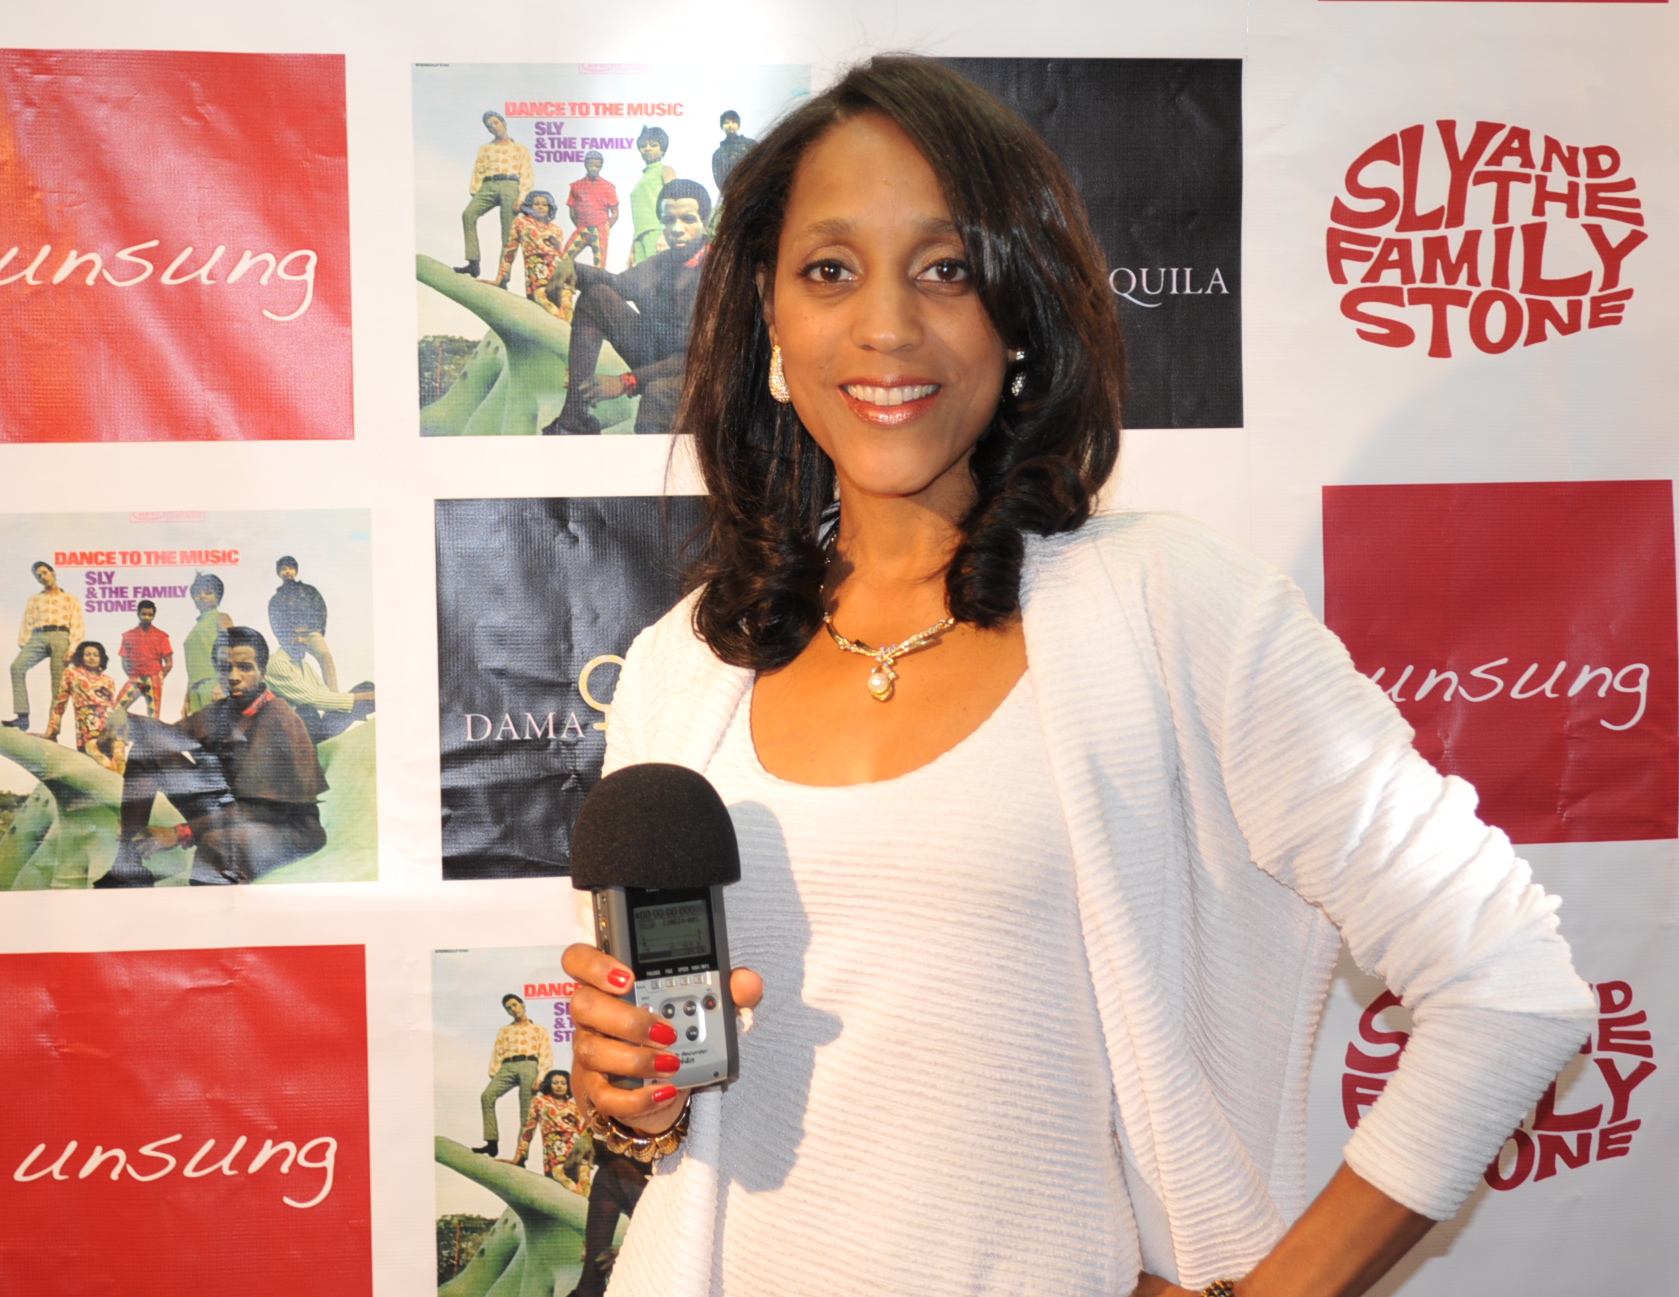 Karla Gordy Bristol working the red carpet at TV One's Unsung on Sly and the Family Stone Premier. Red Carpet Interviewer and event Q&A Host.